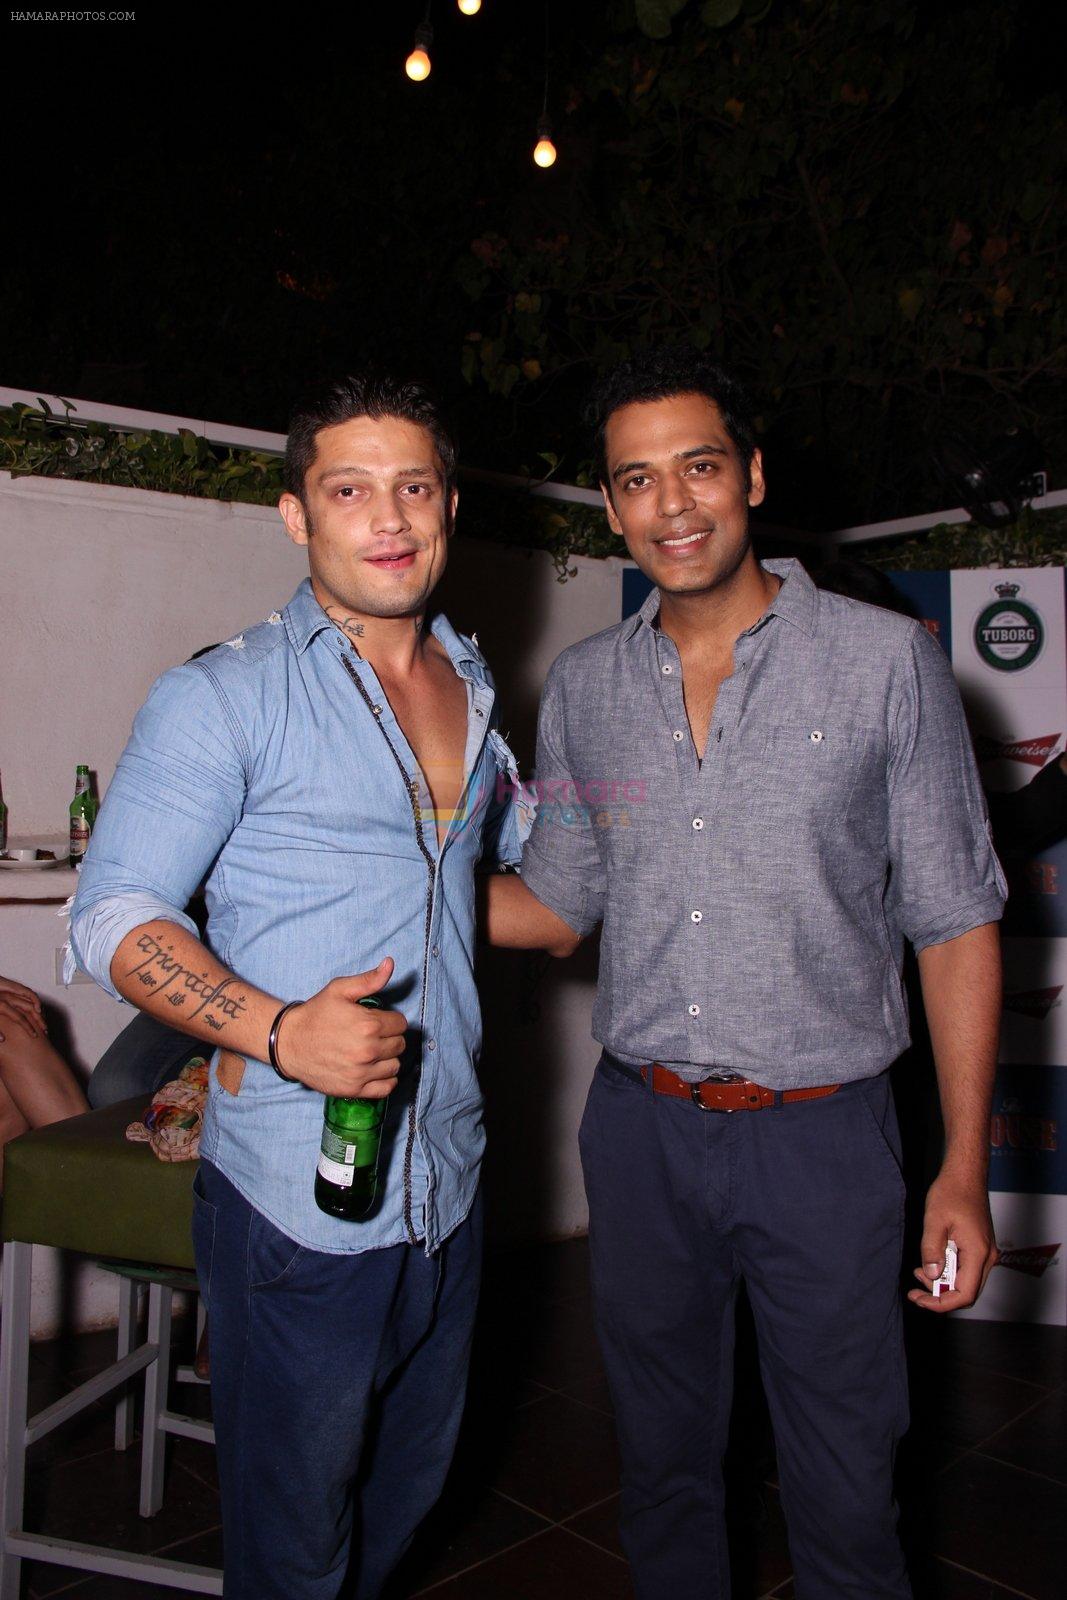 Sameer Kochhar at The House restaurant  Launch in Mumbai on 29th March 2015